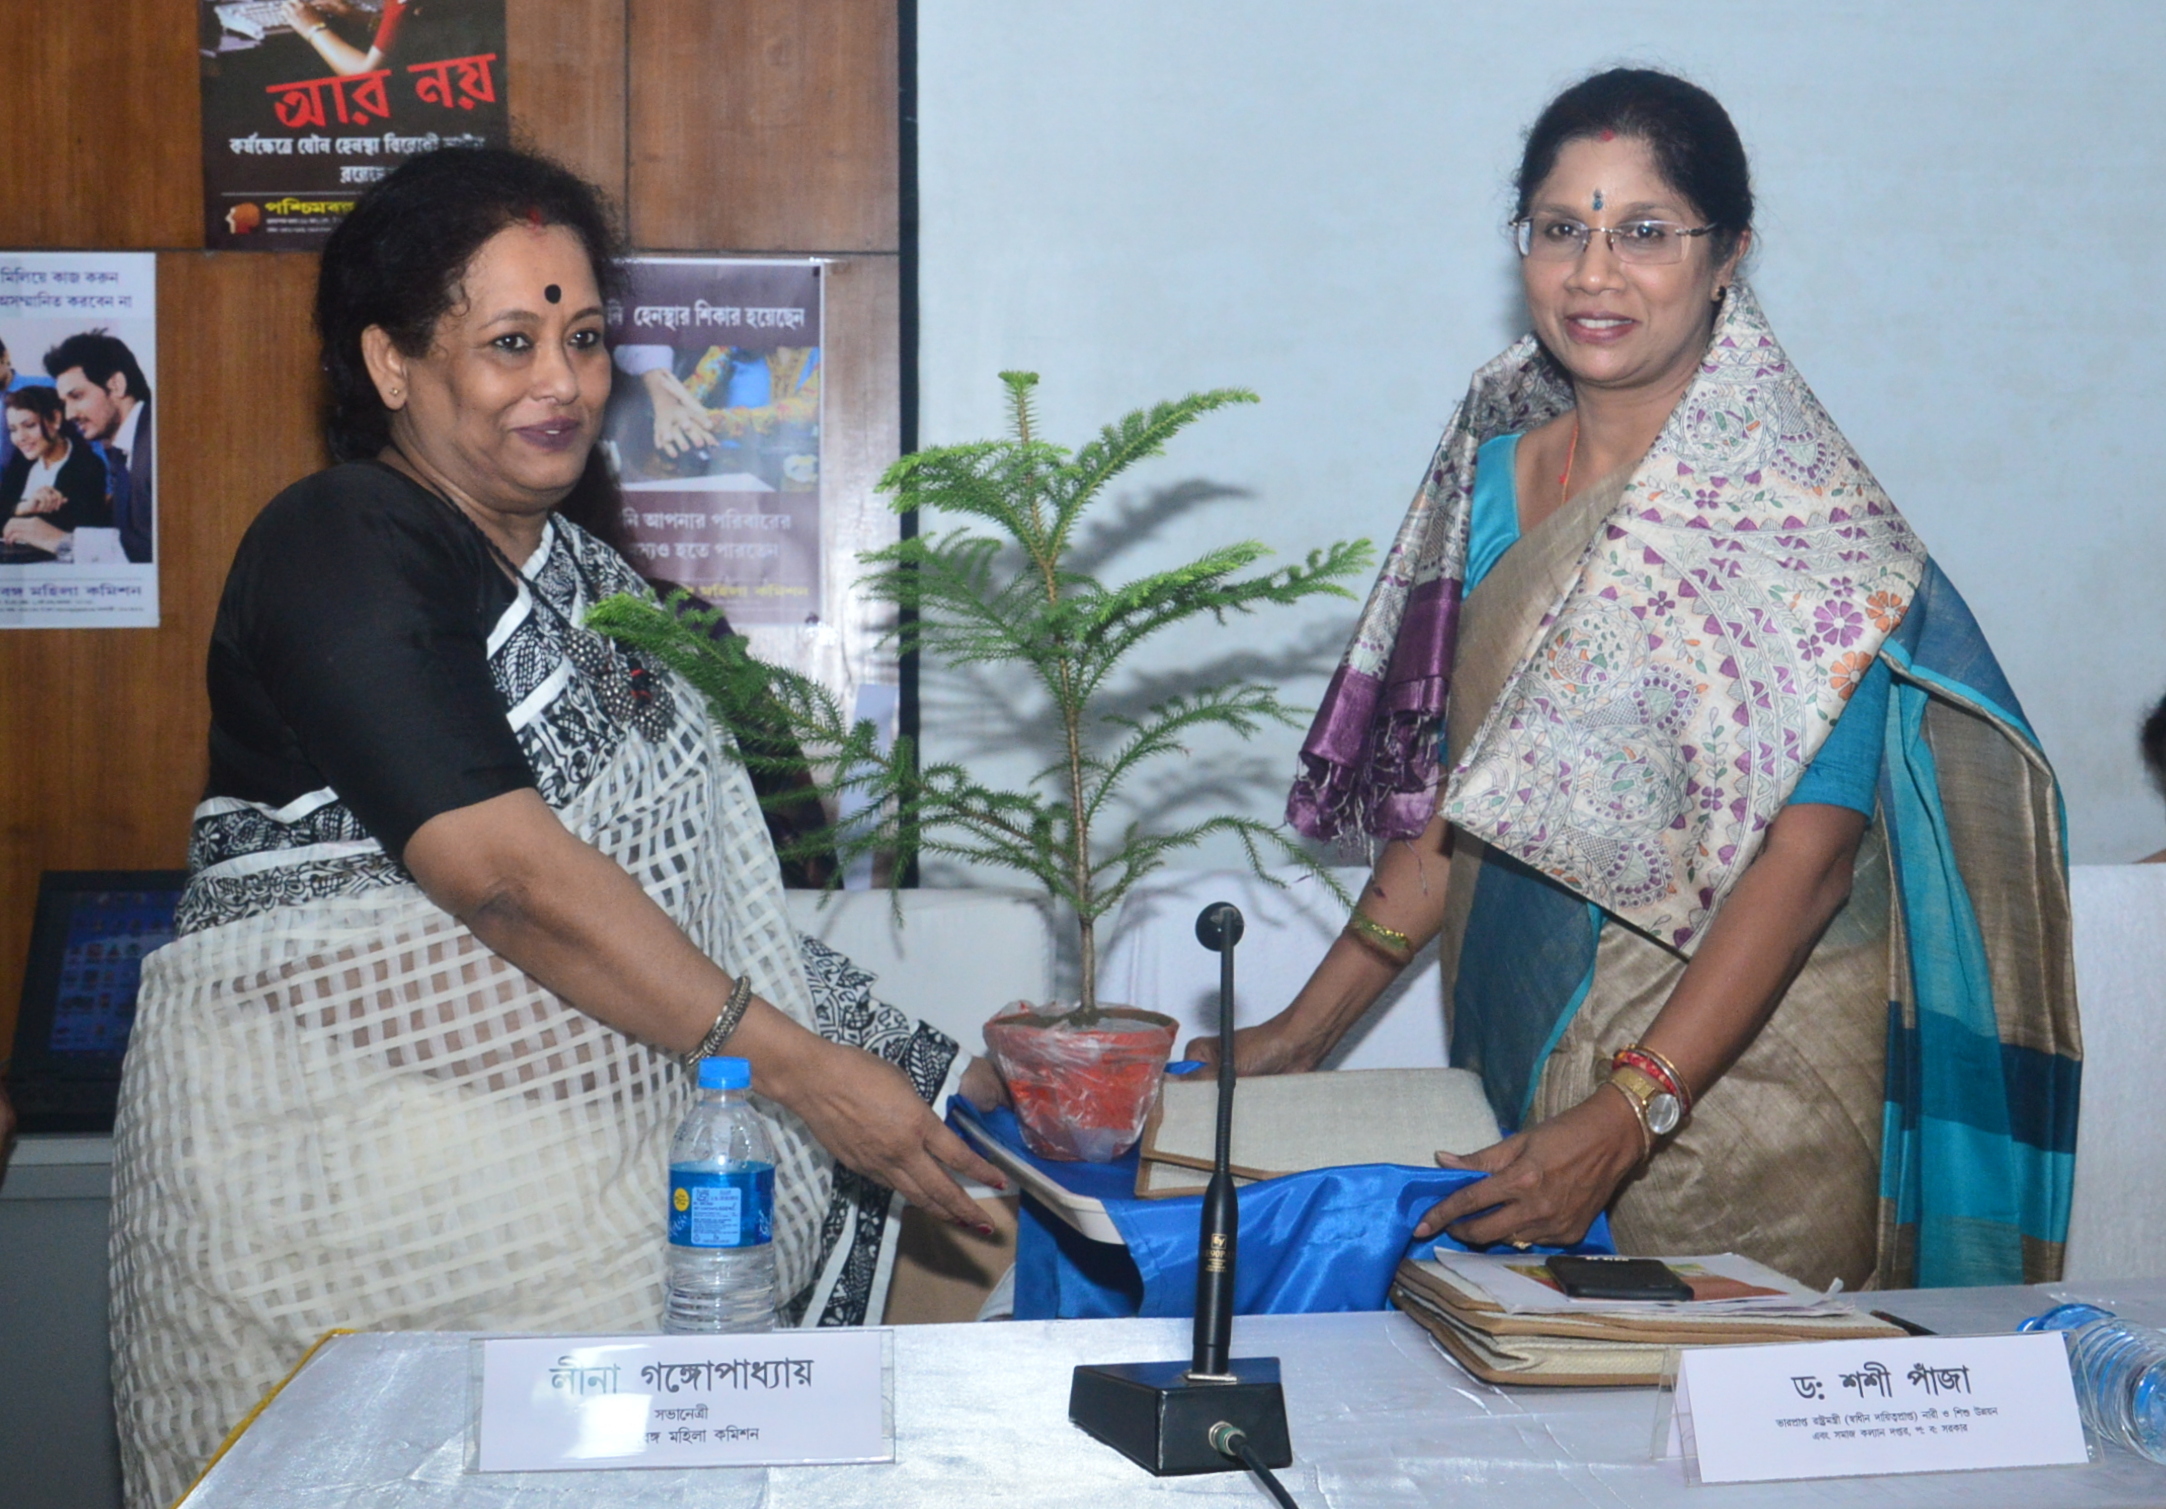 The Chairperson felicitates the Minister